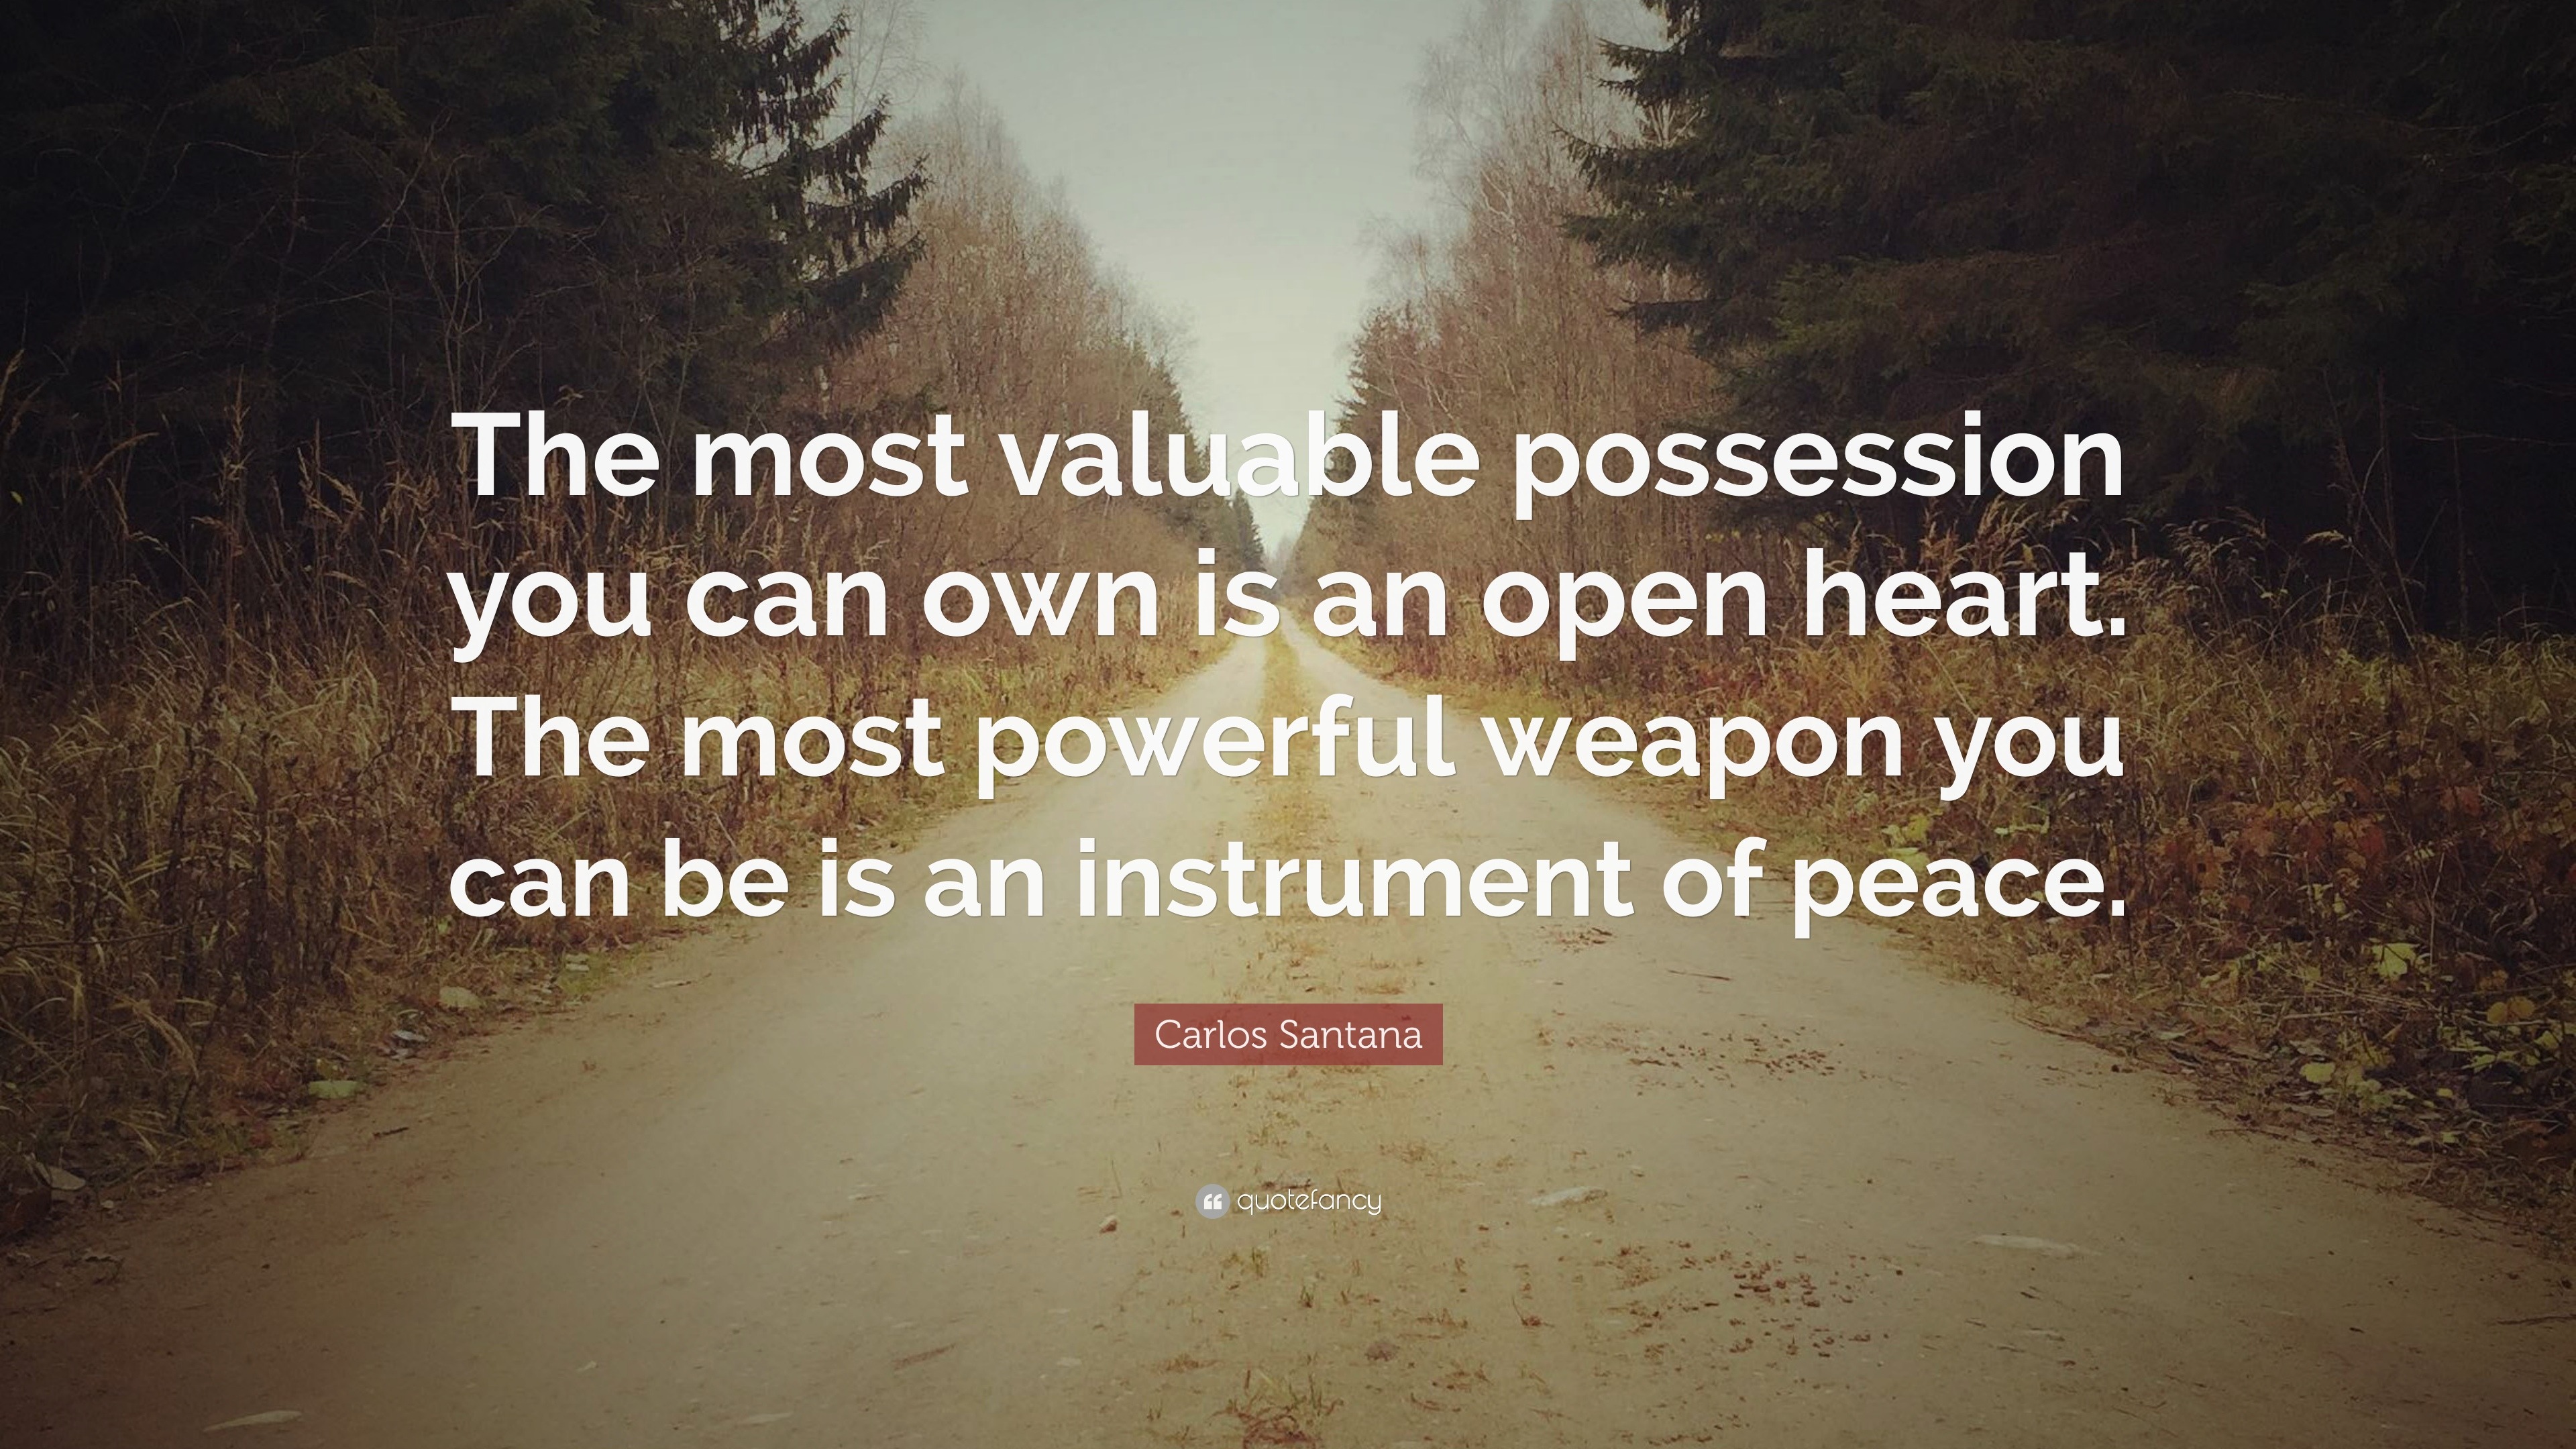 Most valuable possession